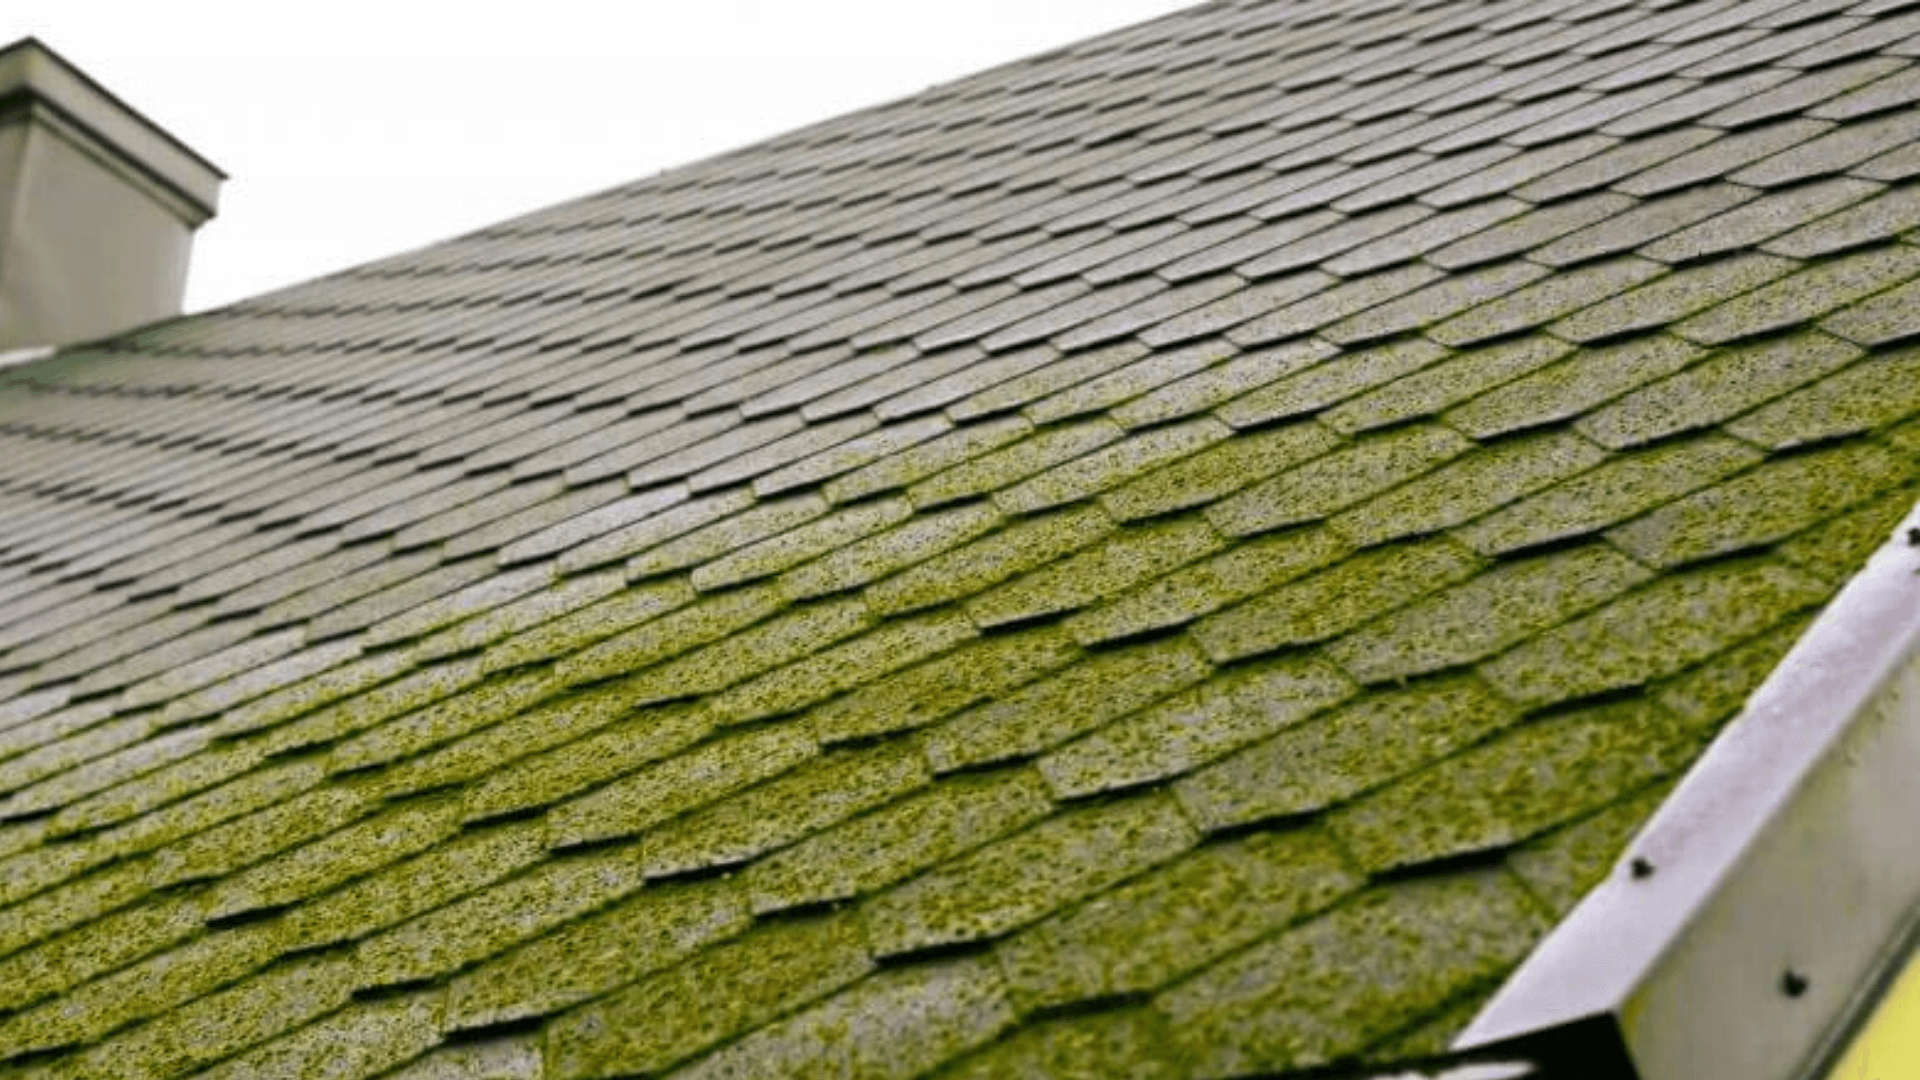 What is the Best Way to Remove Moss From Your Home Roof?